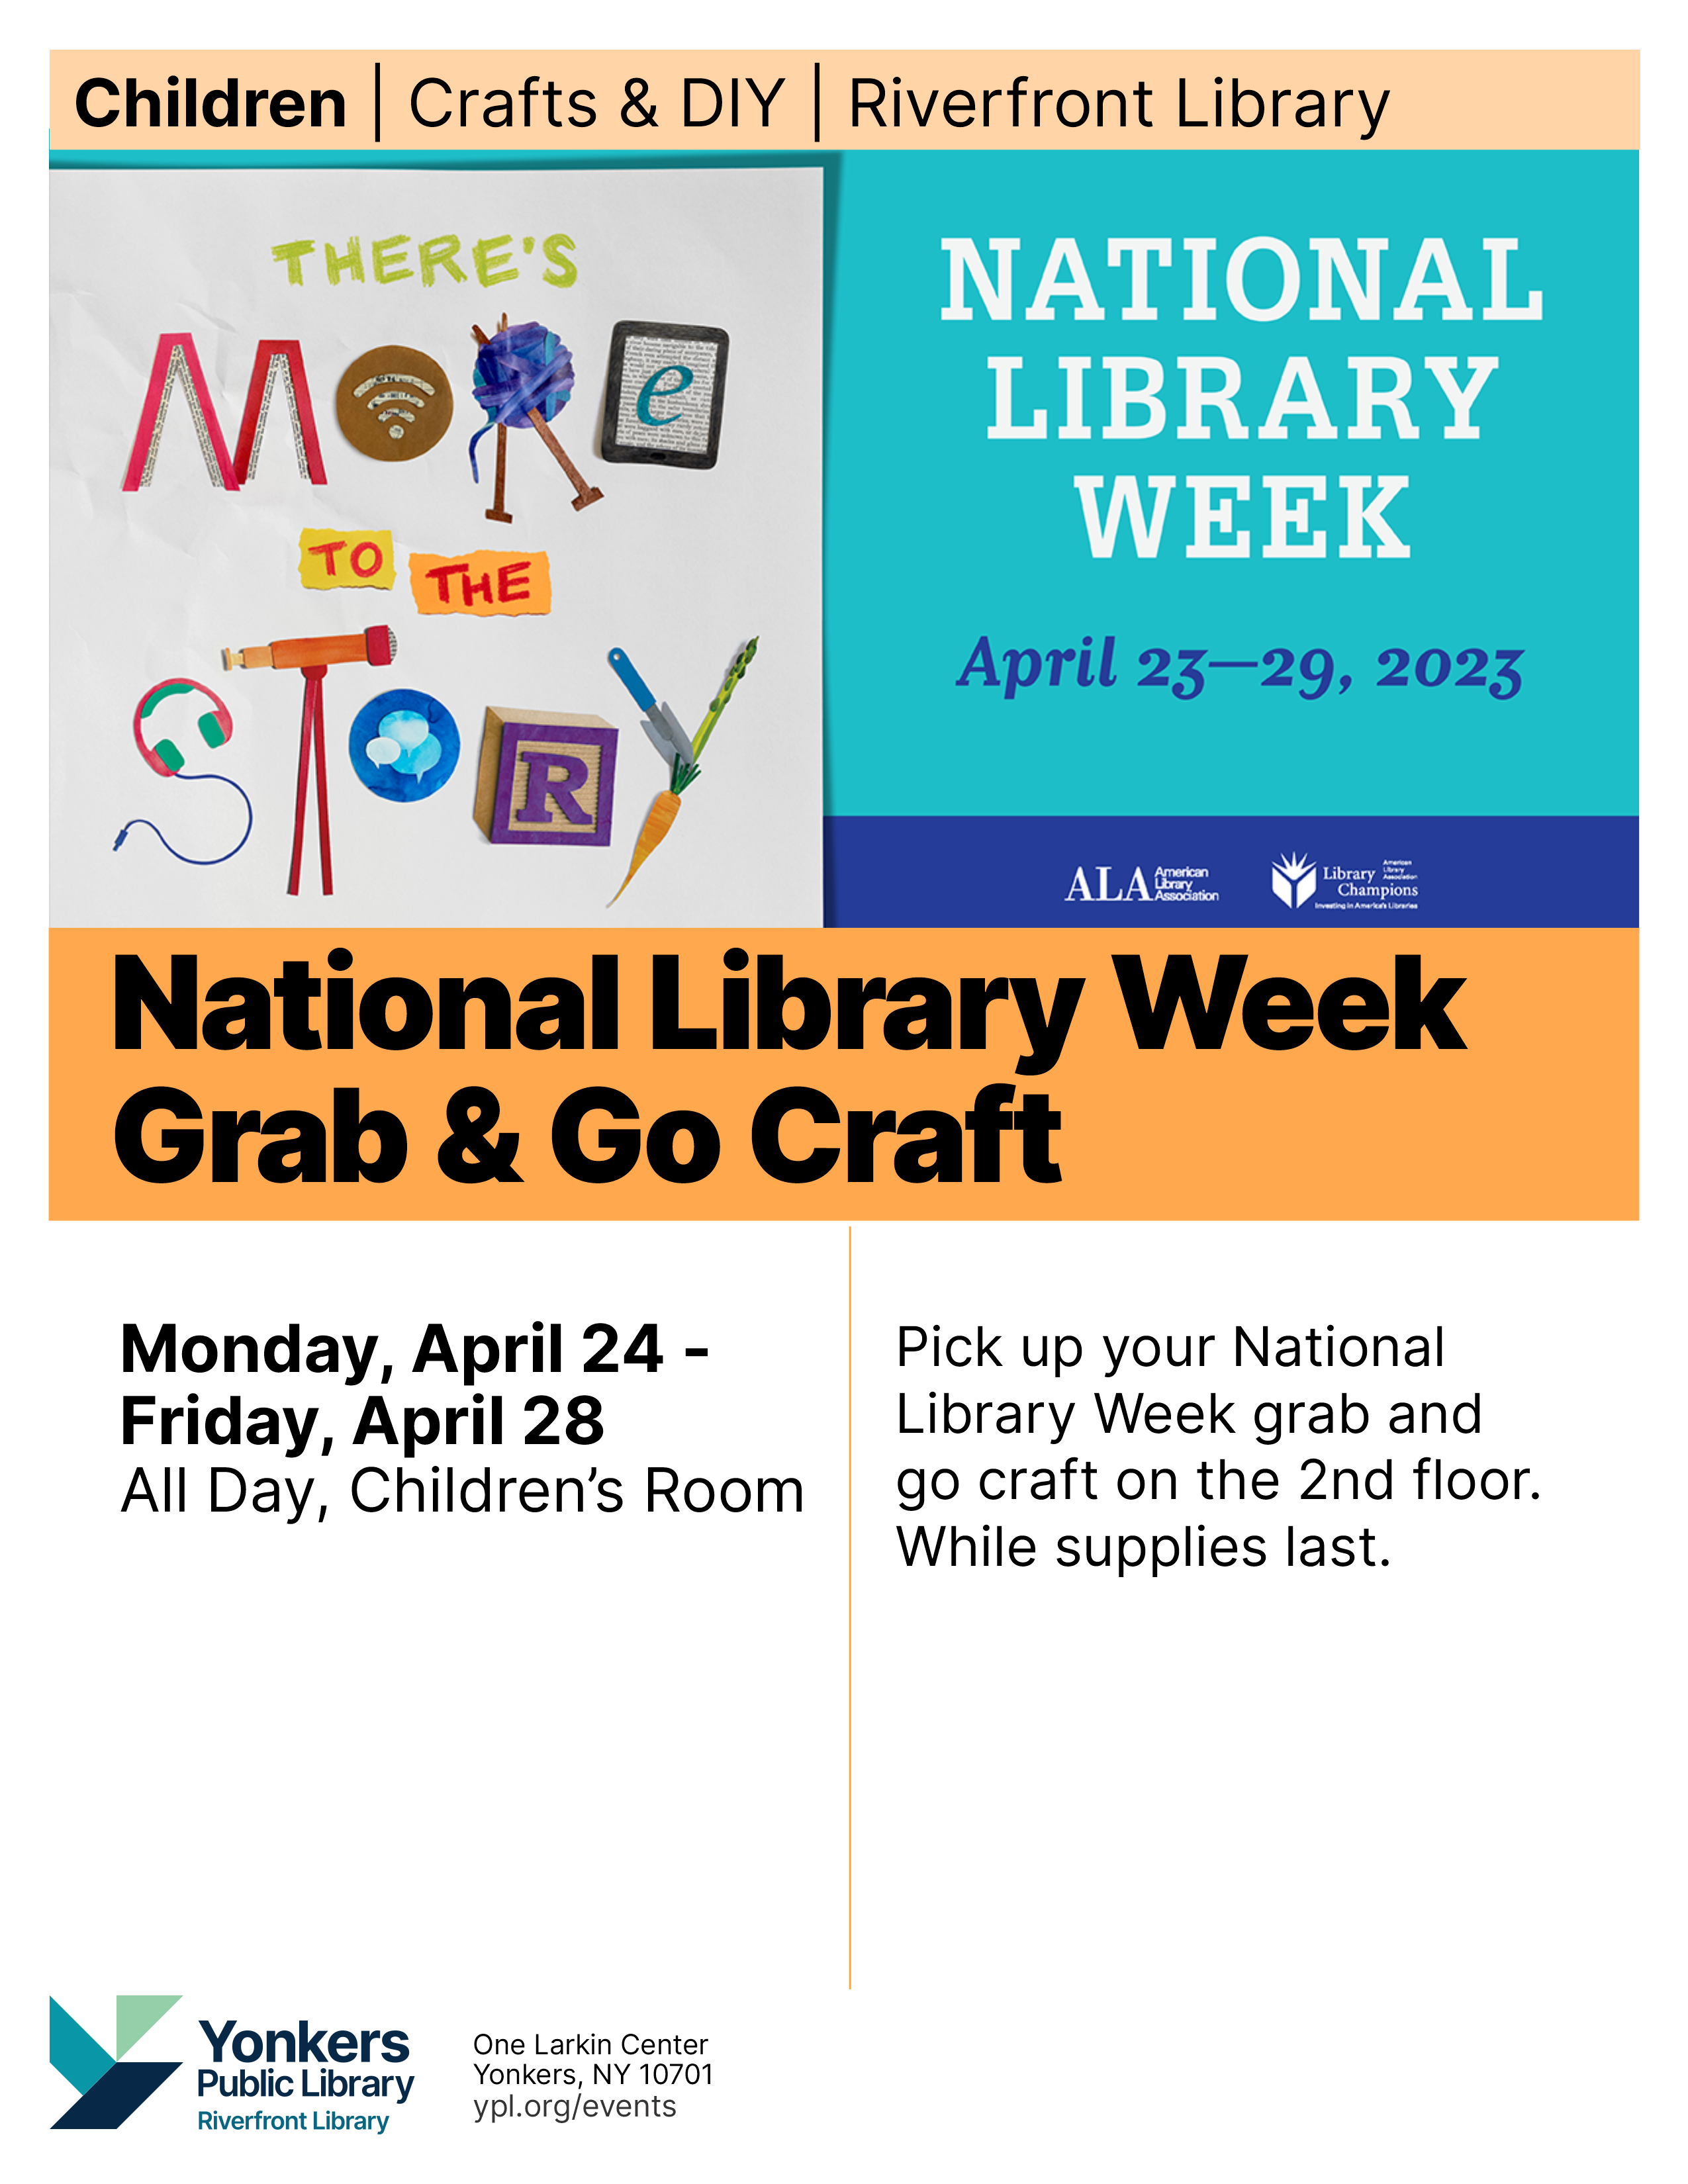 National Library Week grab and go